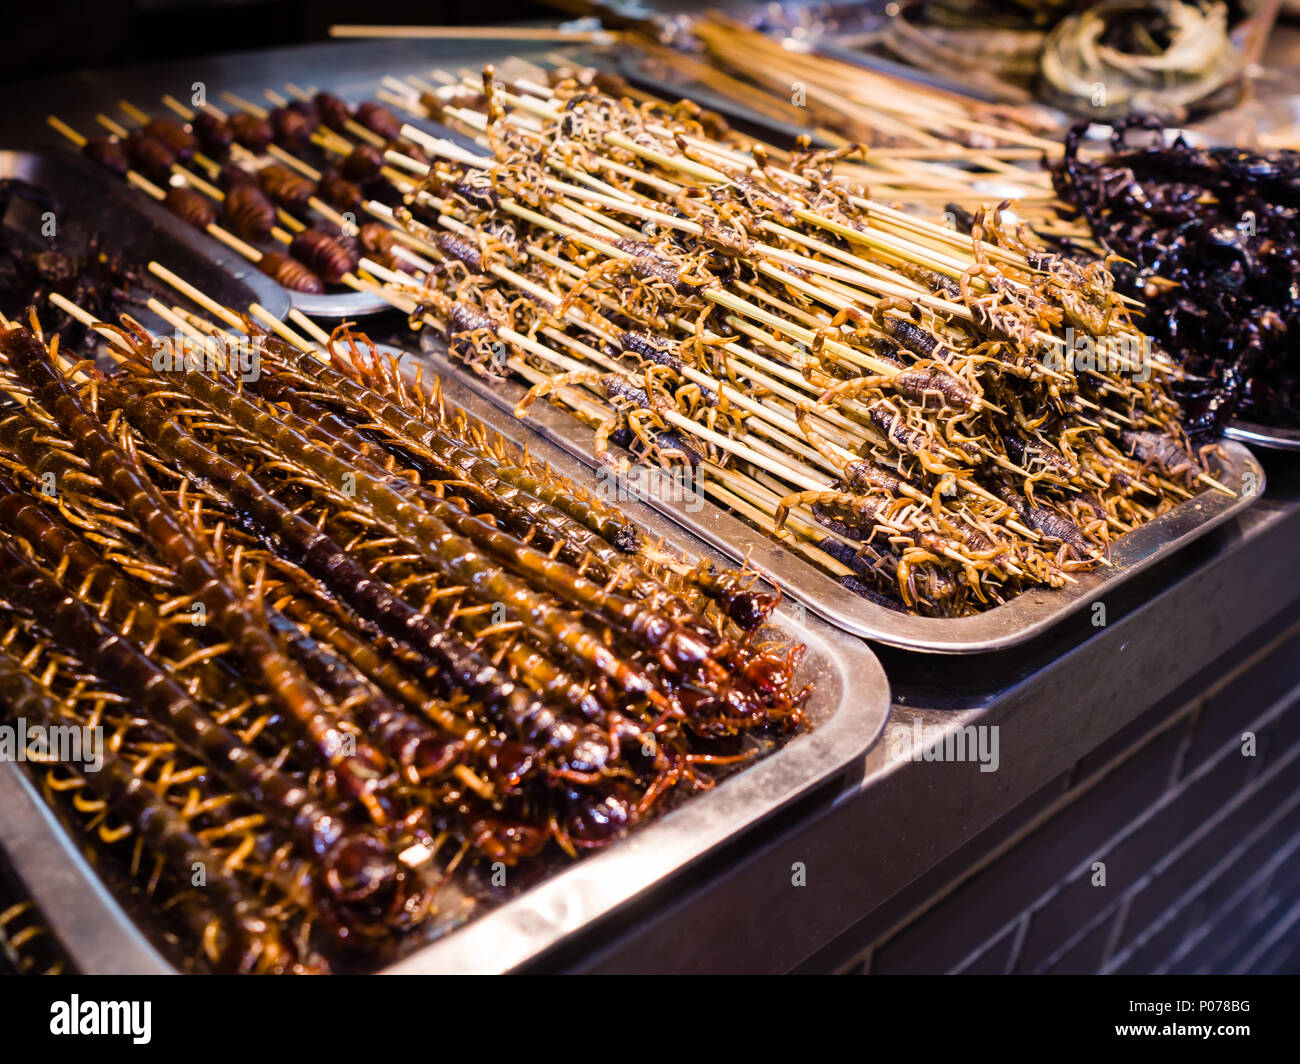 Insect skewers in China Stock Photo